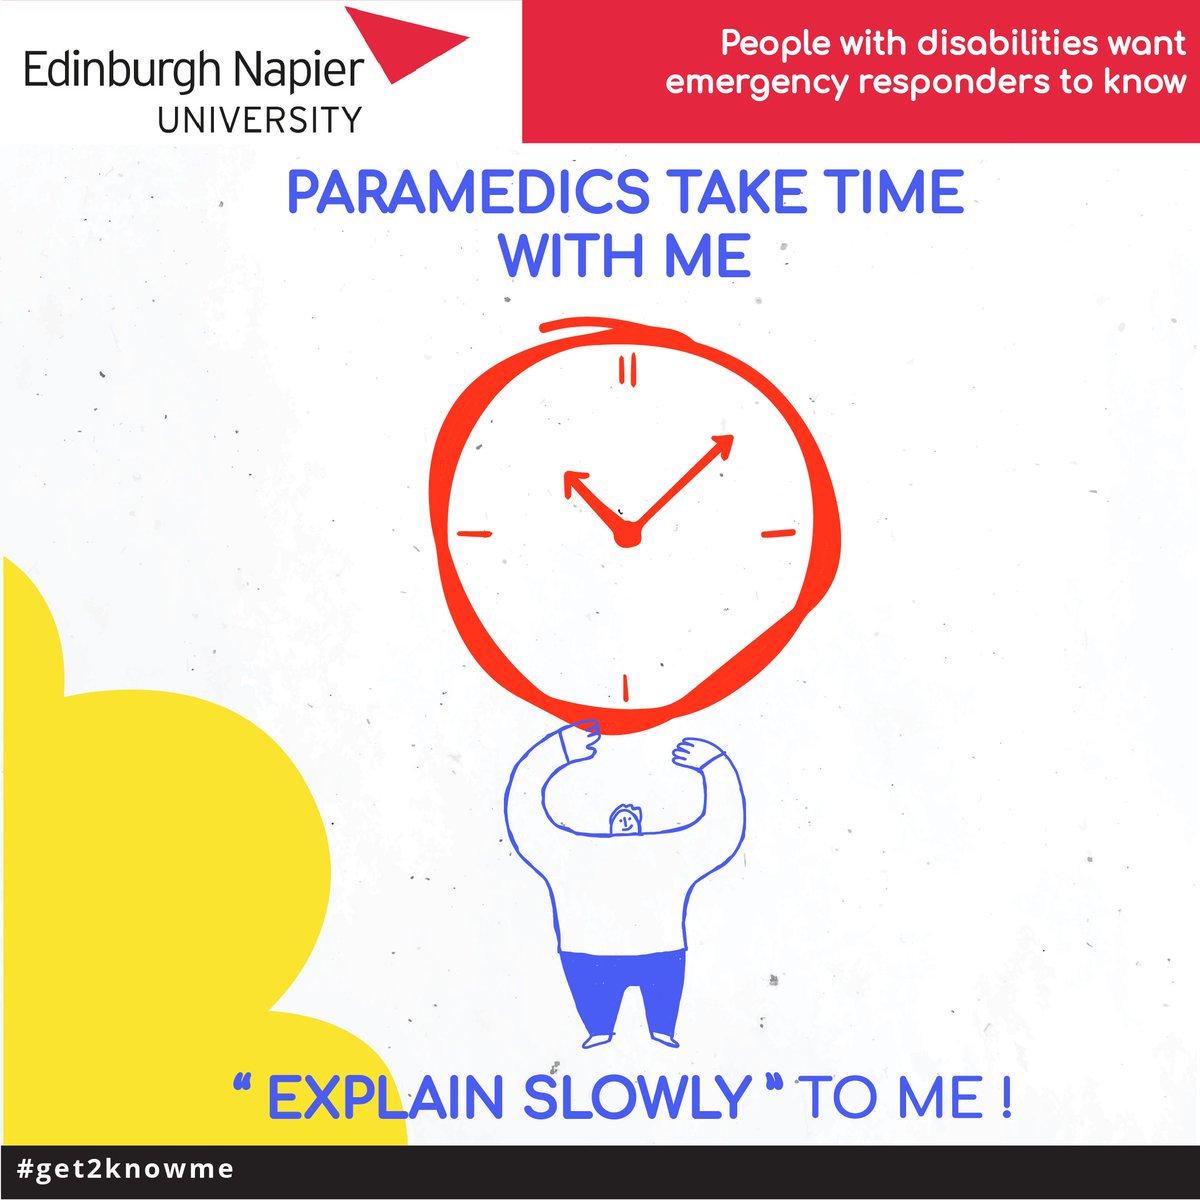 ⭐ During Scottish Learning Disability Week we are sharing fantastic posters co-designed by researchers & people with learning disabilities (see below)!

The #get2knowme project aims to increase awareness about #emergencycare and what ppl want emergency responders to know 👇